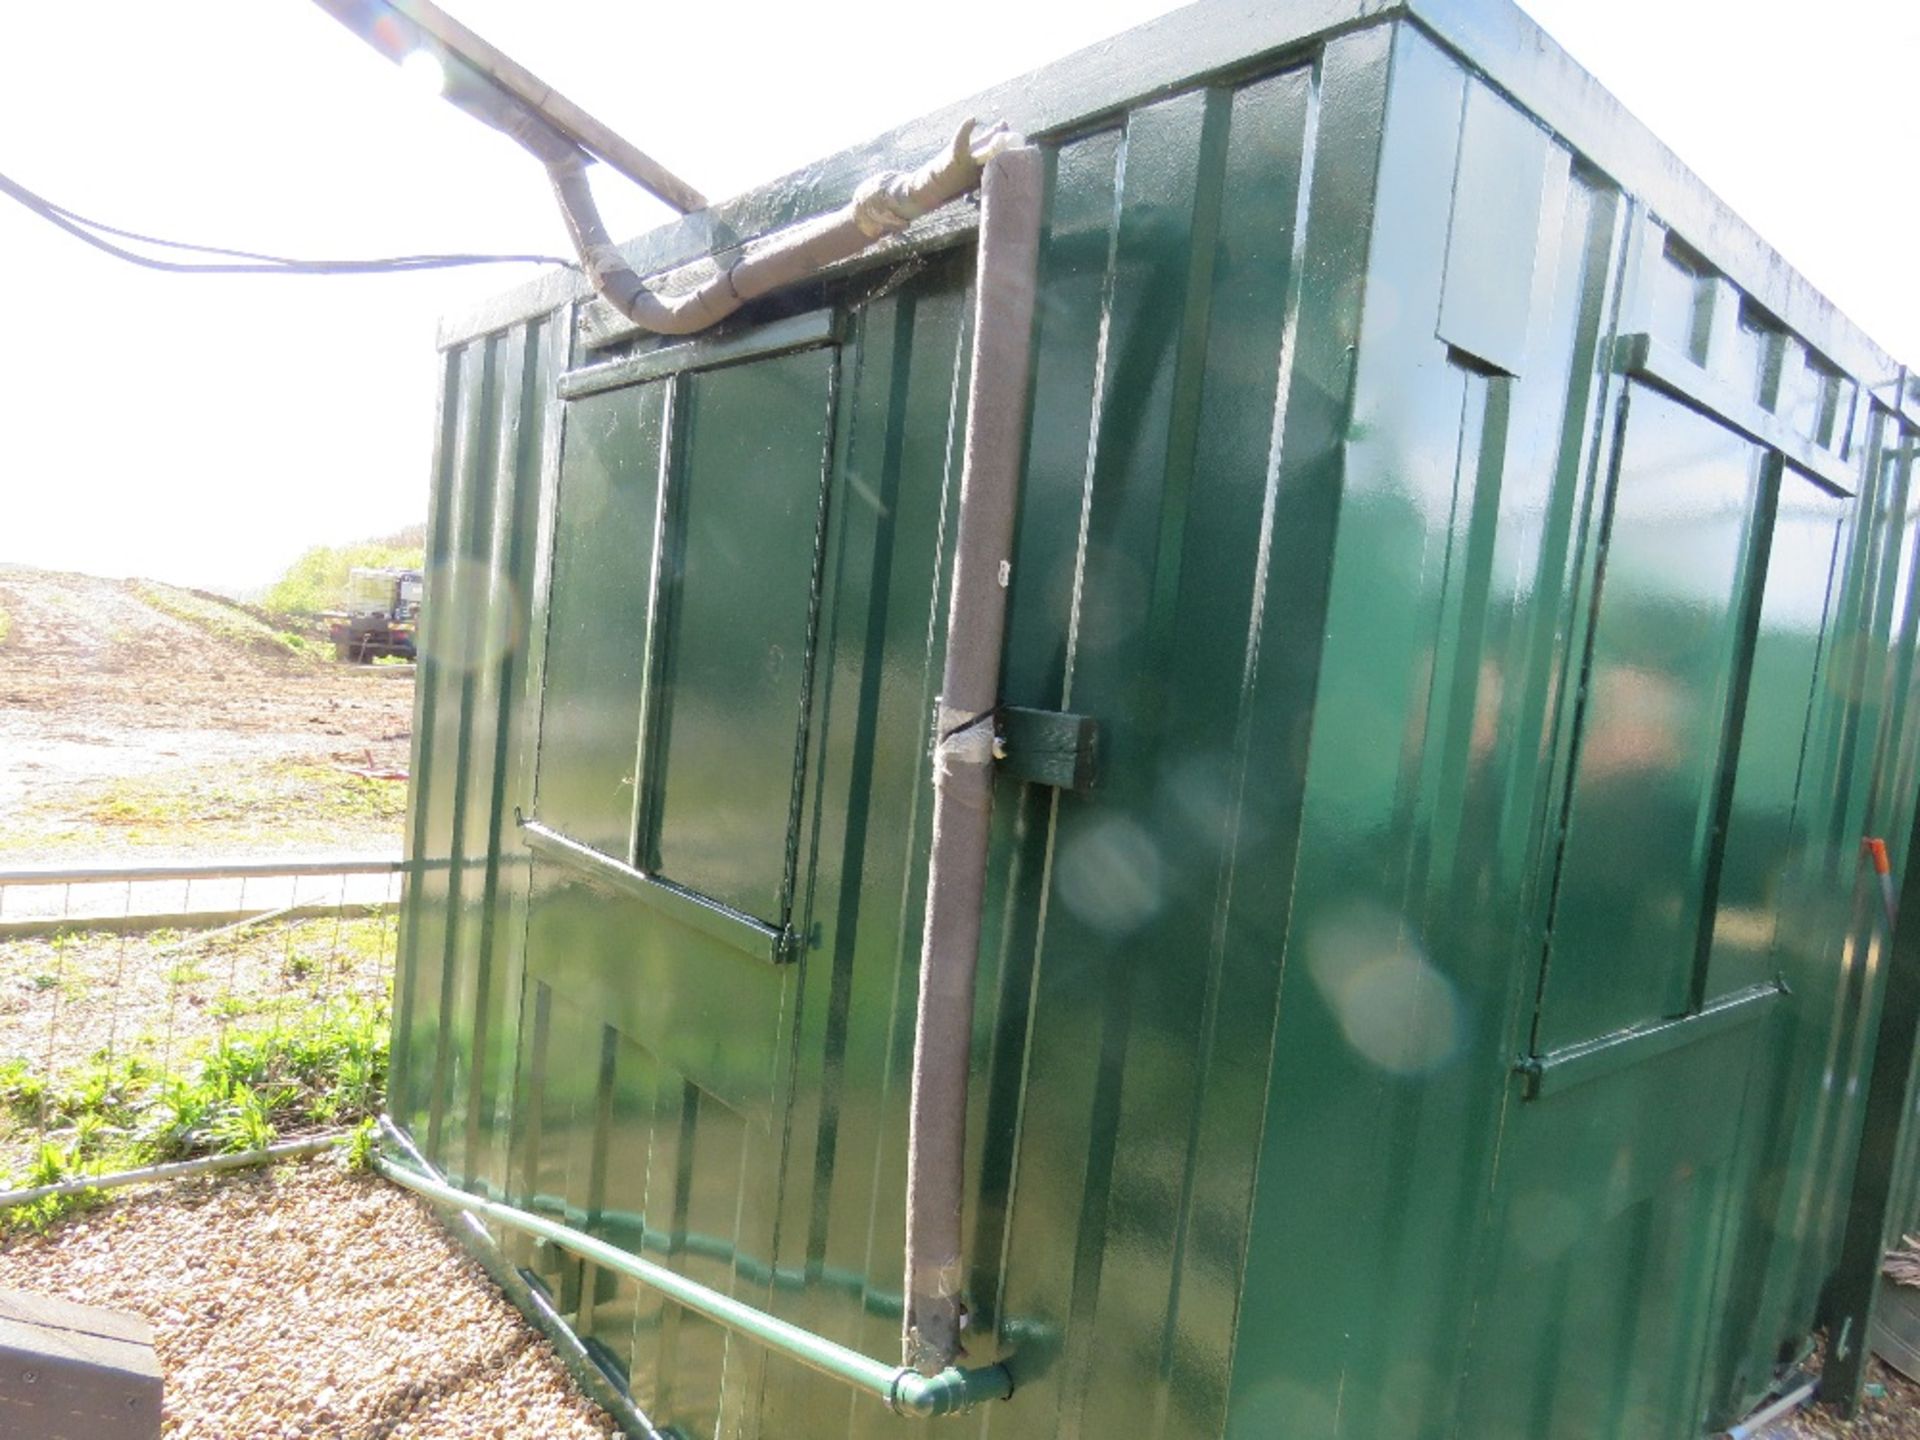 PORTABLE SITE OFFICE 32FT X 10FT APPROX WITH SMALL KITCHEN AREA AT ONE END. 60/40 SPLIT APPROX AS SH - Image 3 of 8